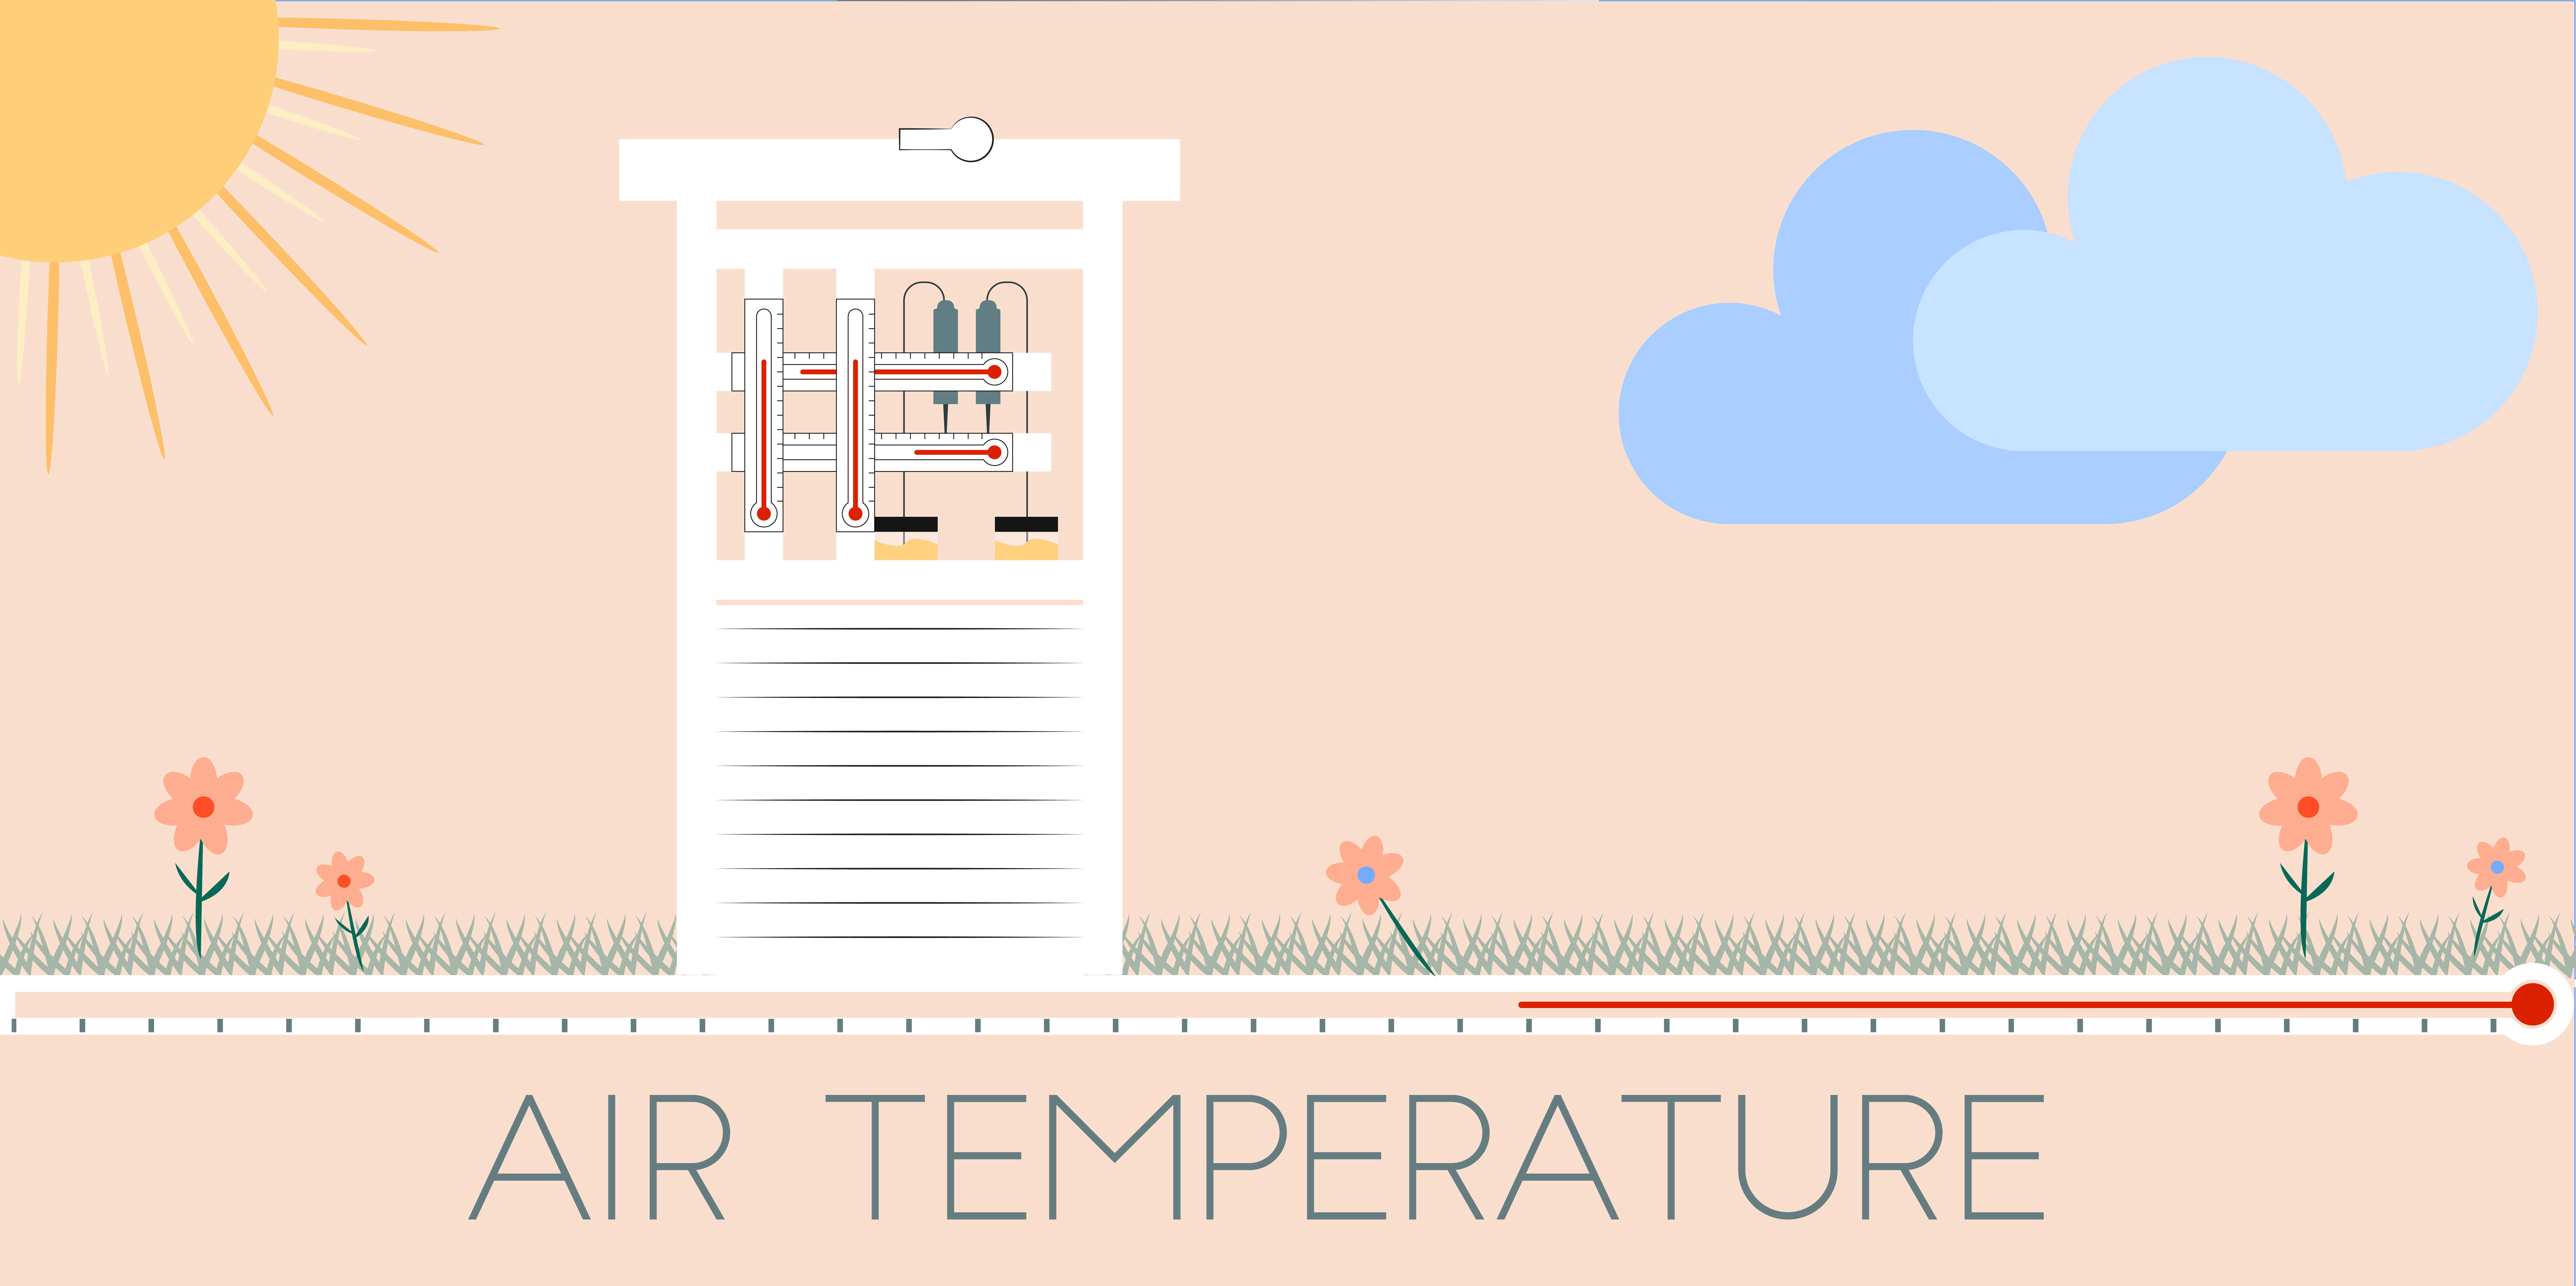 Illustration shows thermometers in a box, clouds and the Sun with the words "Air Temperature."